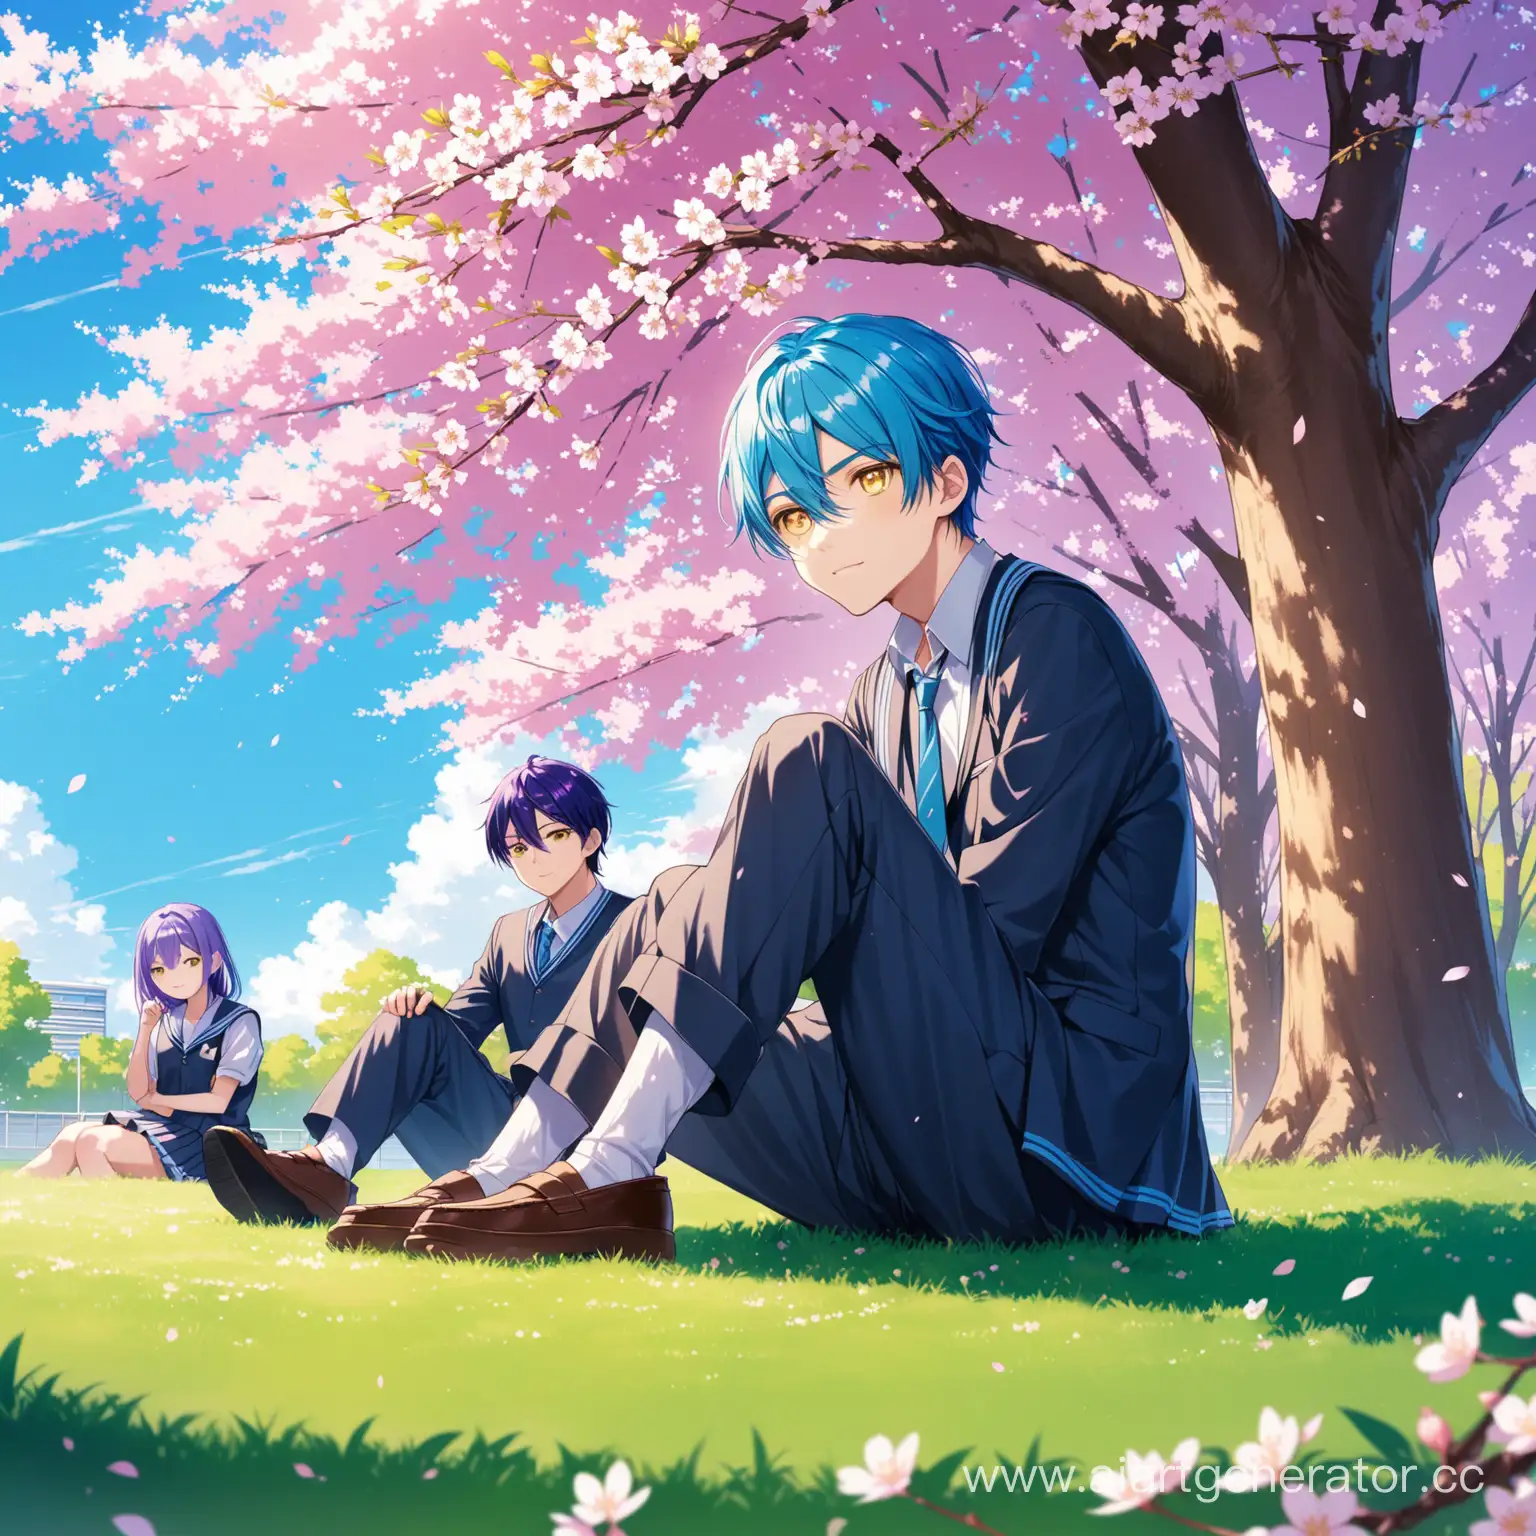 Two-Boys-with-Unique-Hair-Colors-Relaxing-by-Cherry-Blossom-Tree